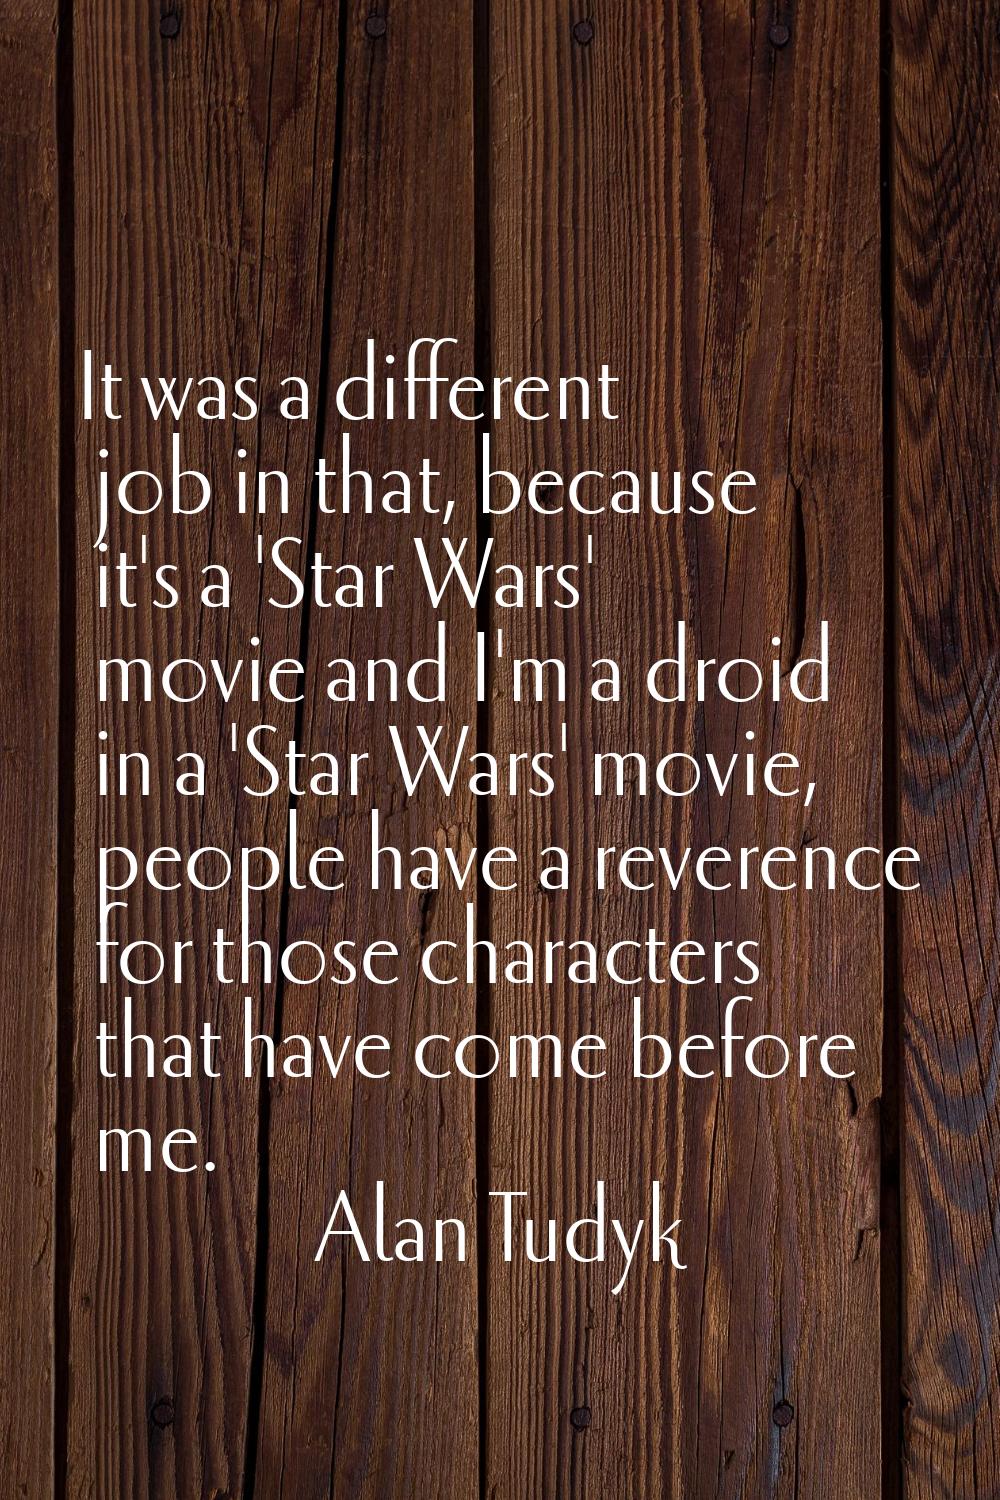 It was a different job in that, because it's a 'Star Wars' movie and I'm a droid in a 'Star Wars' m